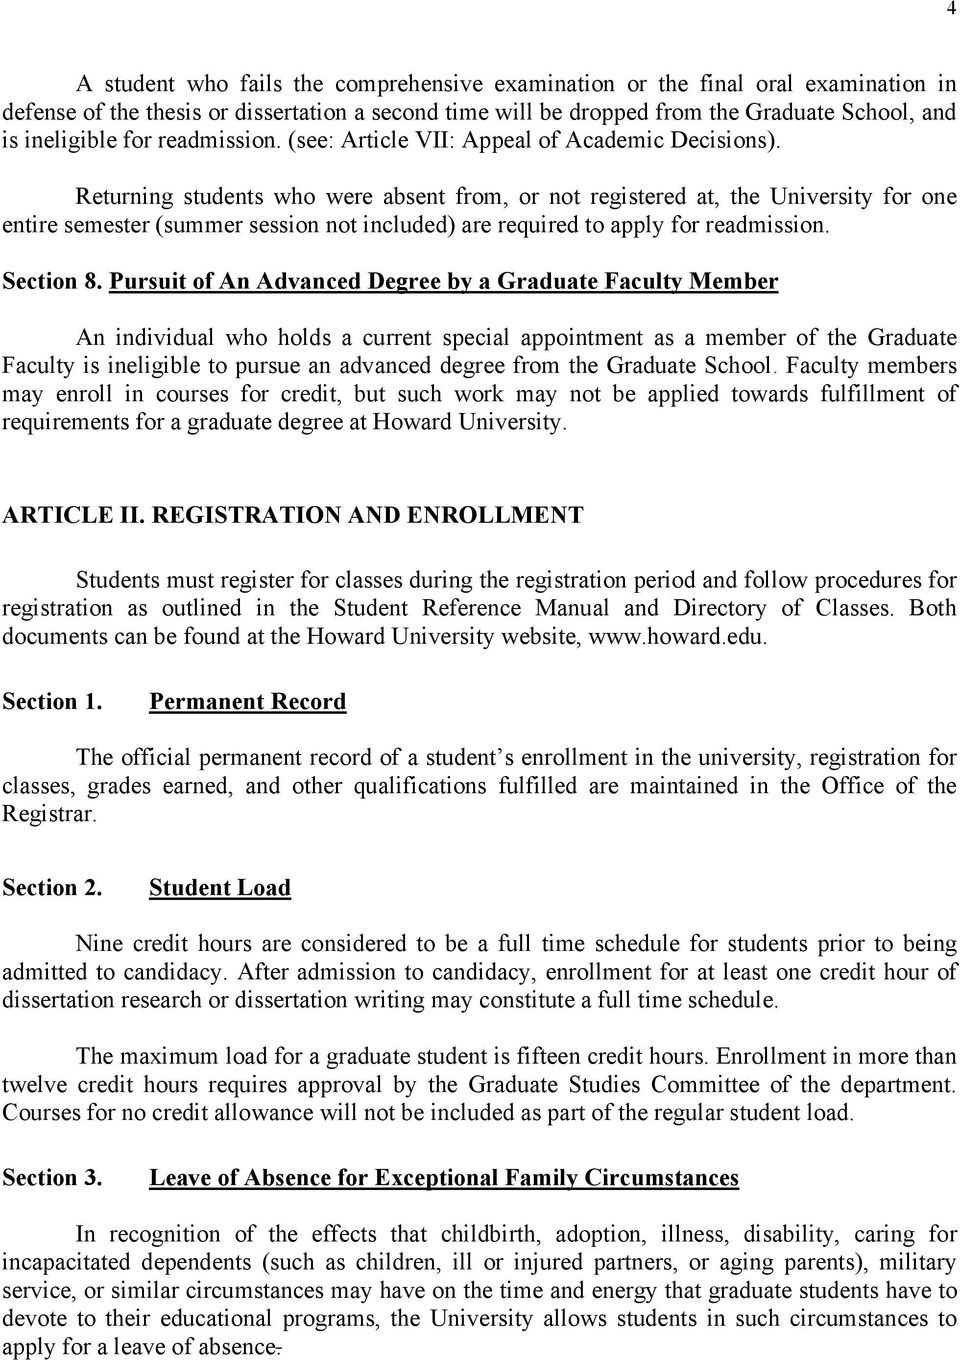 Returning students who were absent from, or not registered at, the University for one entire semester (summer session not included) are required to apply for readmission. Section 8.